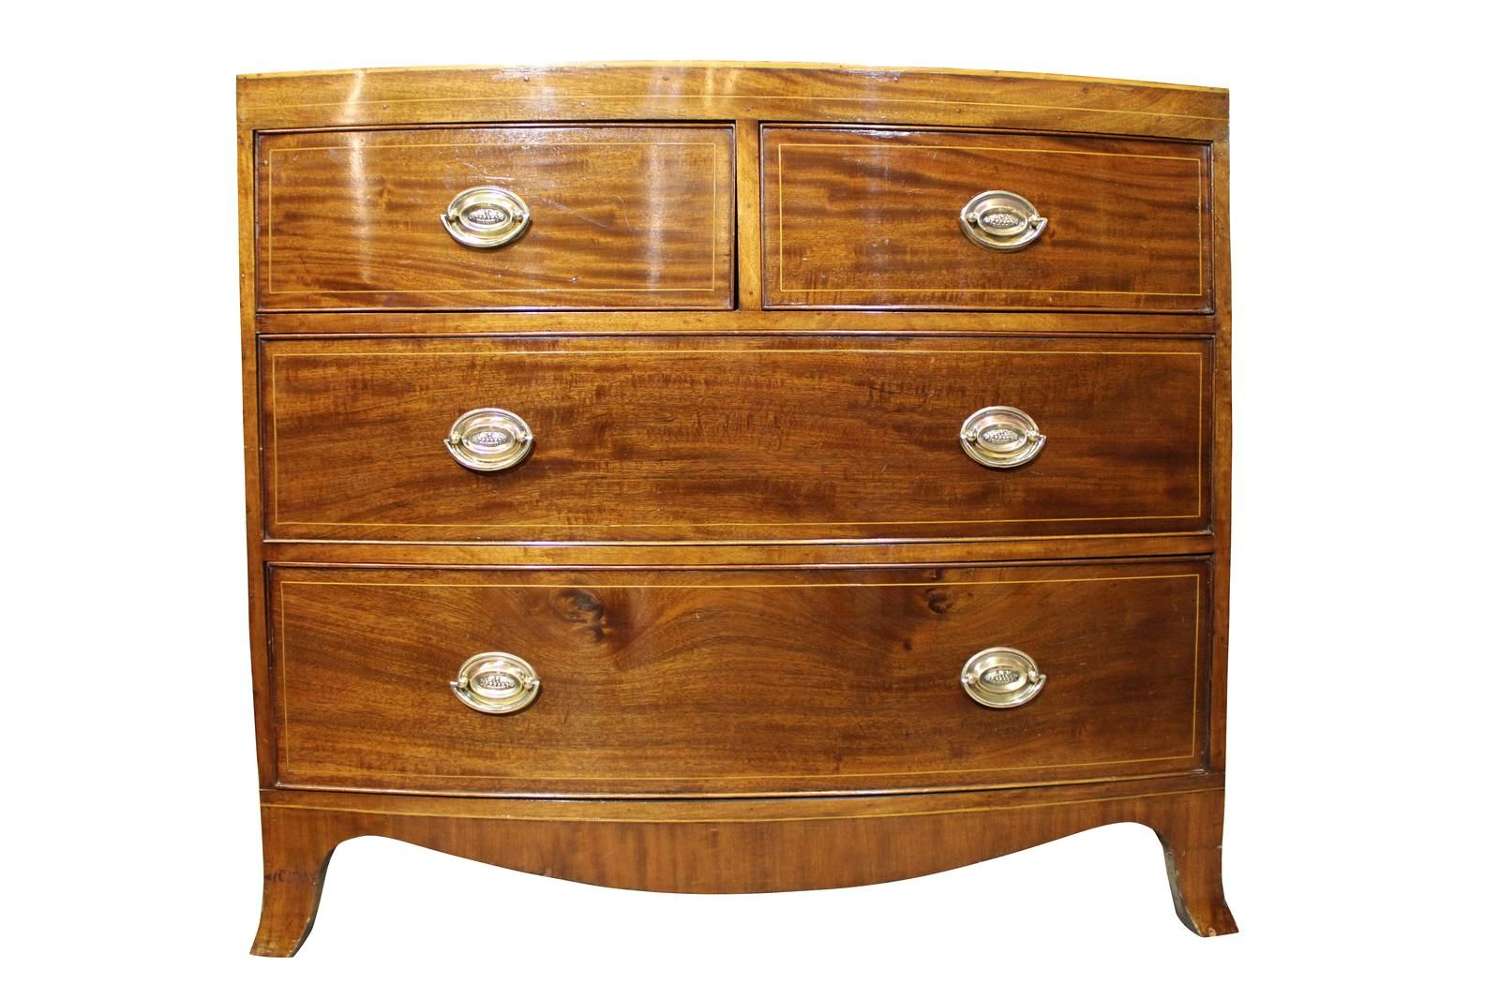 Low String Inlaid Mahogany Bow Fronted Chest of Drawers